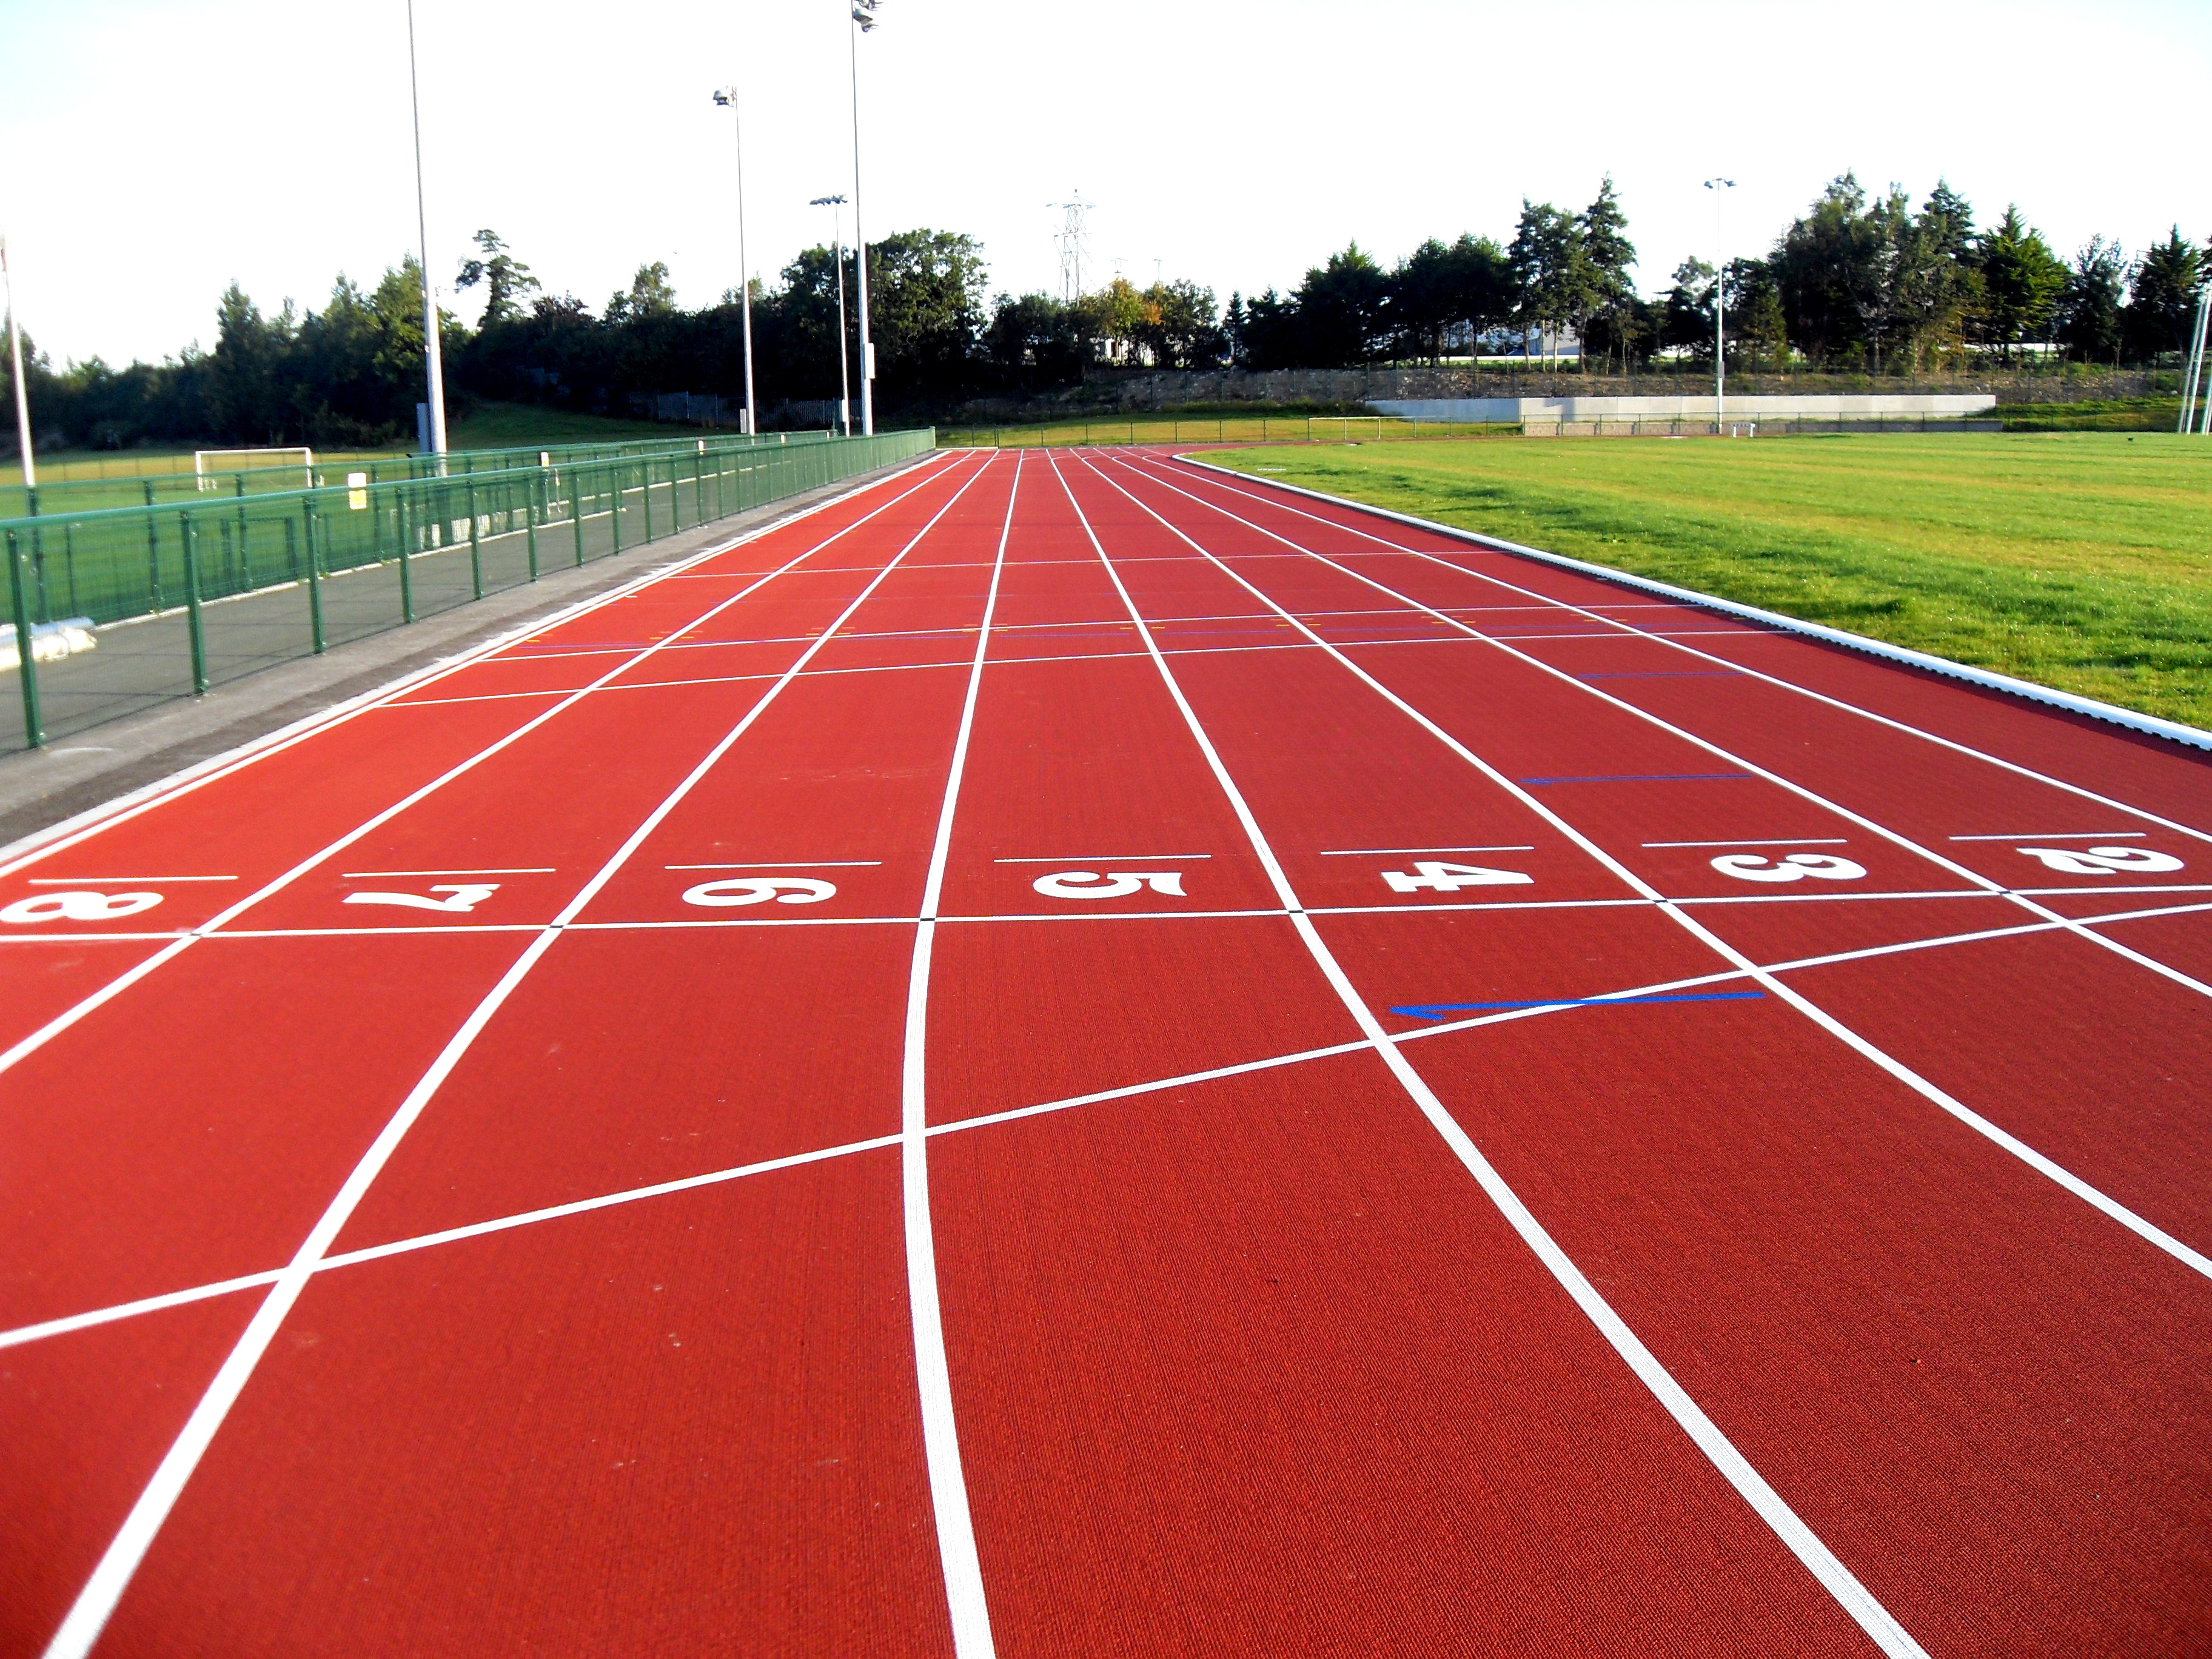 Polymeric Surfacing | Polymeric Sports Surfaces